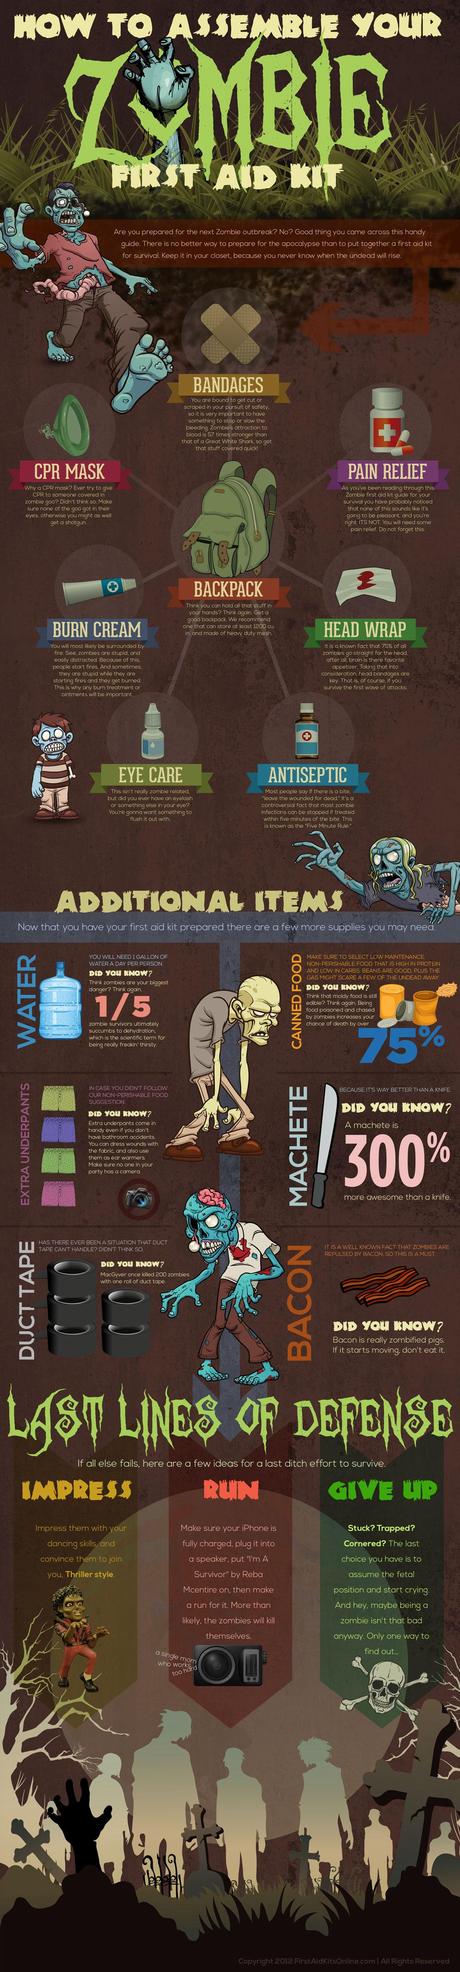 How To Build The Perfect Zombie Survival Kit